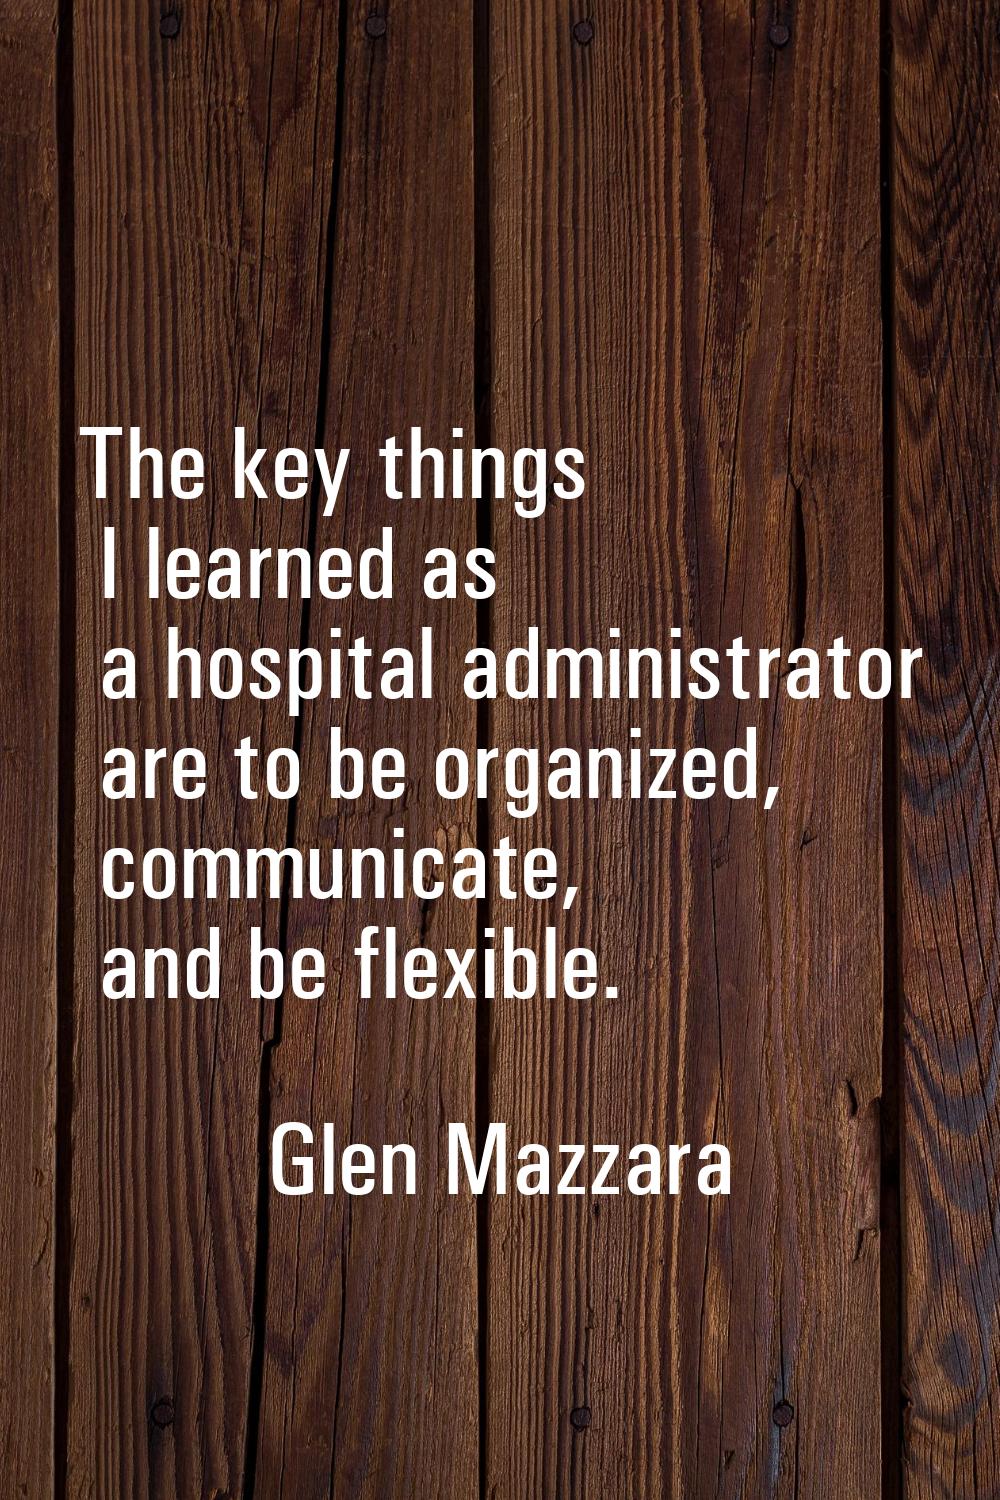 The key things I learned as a hospital administrator are to be organized, communicate, and be flexi